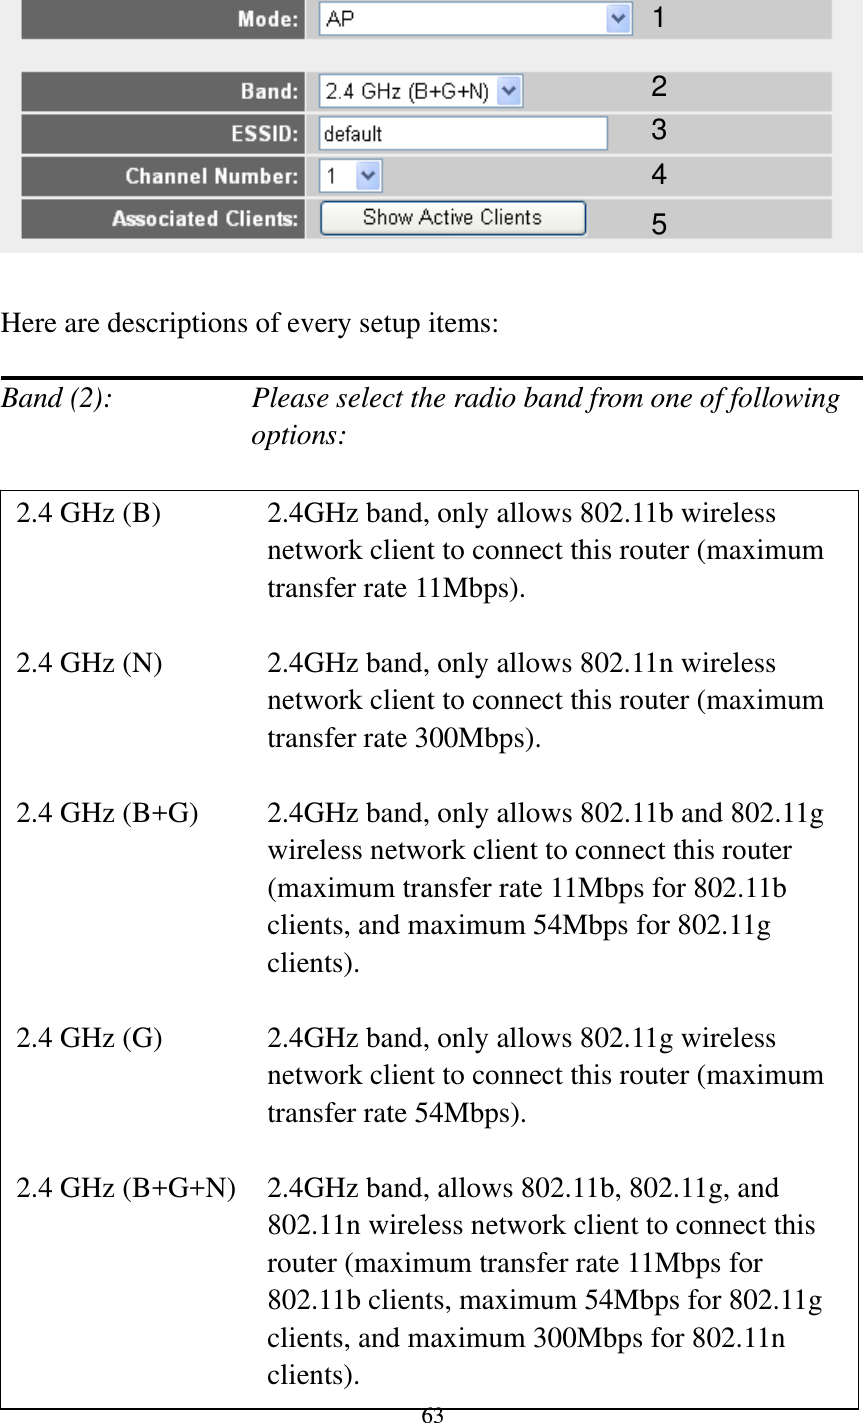 63    Here are descriptions of every setup items:  Band (2):    Please select the radio band from one of following options:                         12 34 2.4 GHz (B)  2.4GHz band, only allows 802.11b wireless network client to connect this router (maximum transfer rate 11Mbps).  2.4 GHz (N)  2.4GHz band, only allows 802.11n wireless network client to connect this router (maximum transfer rate 300Mbps).  2.4 GHz (B+G)    2.4GHz band, only allows 802.11b and 802.11g wireless network client to connect this router (maximum transfer rate 11Mbps for 802.11b clients, and maximum 54Mbps for 802.11g clients).  2.4 GHz (G)    2.4GHz band, only allows 802.11g wireless network client to connect this router (maximum transfer rate 54Mbps).  2.4 GHz (B+G+N)    2.4GHz band, allows 802.11b, 802.11g, and 802.11n wireless network client to connect this router (maximum transfer rate 11Mbps for 802.11b clients, maximum 54Mbps for 802.11g clients, and maximum 300Mbps for 802.11n clients). 5 